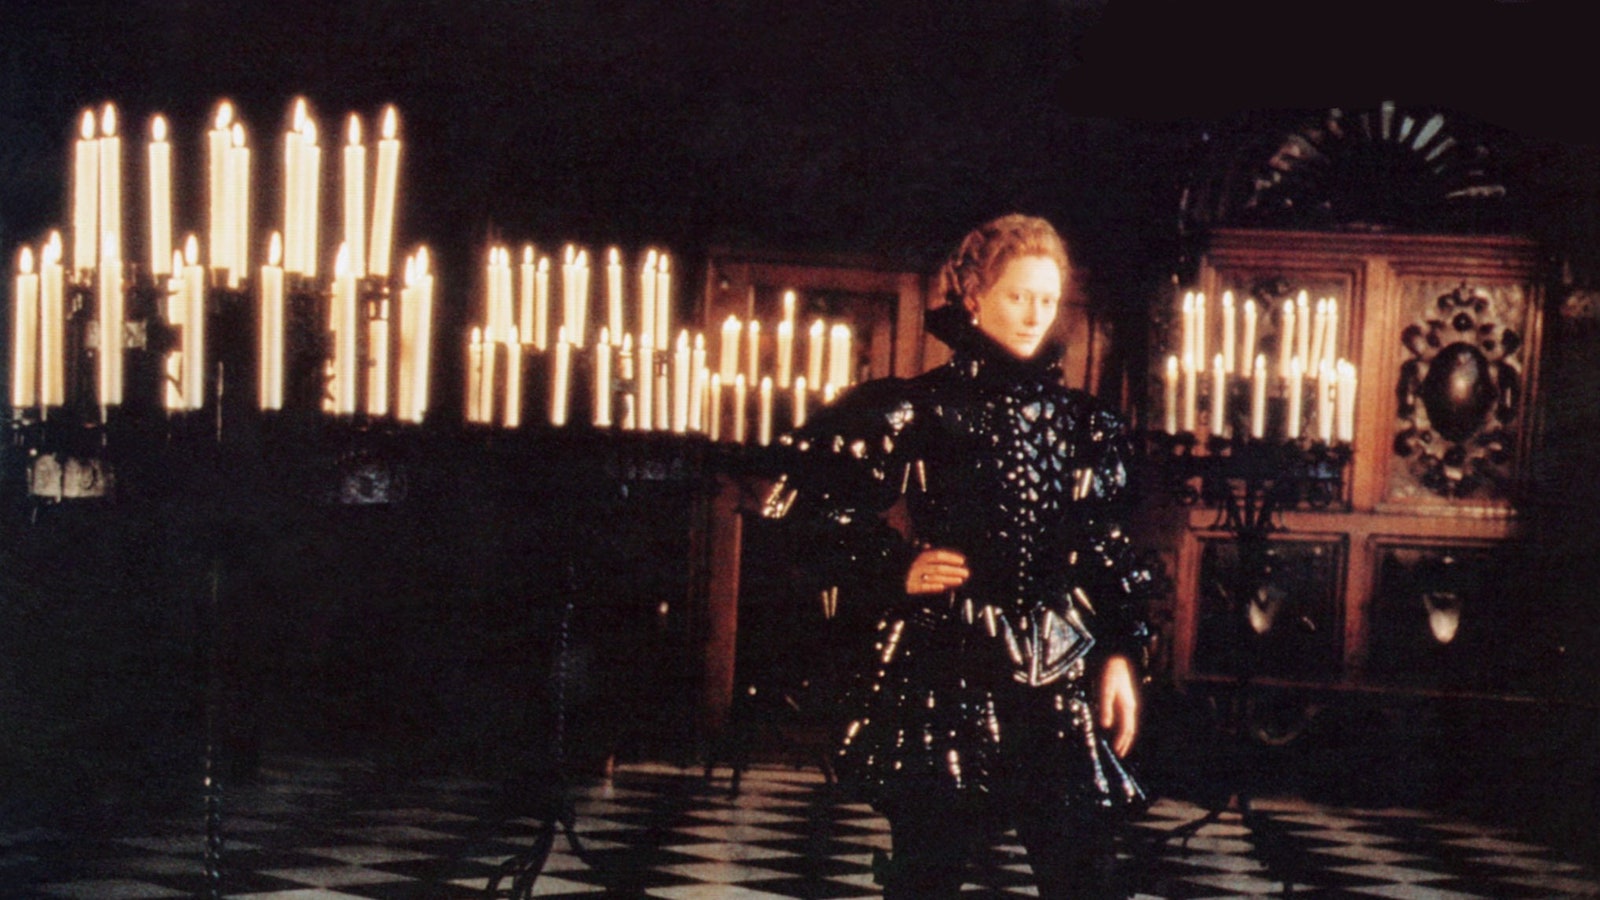 An androgynous English poet of the Elizabethan era stands in a dark room full of lit candles.